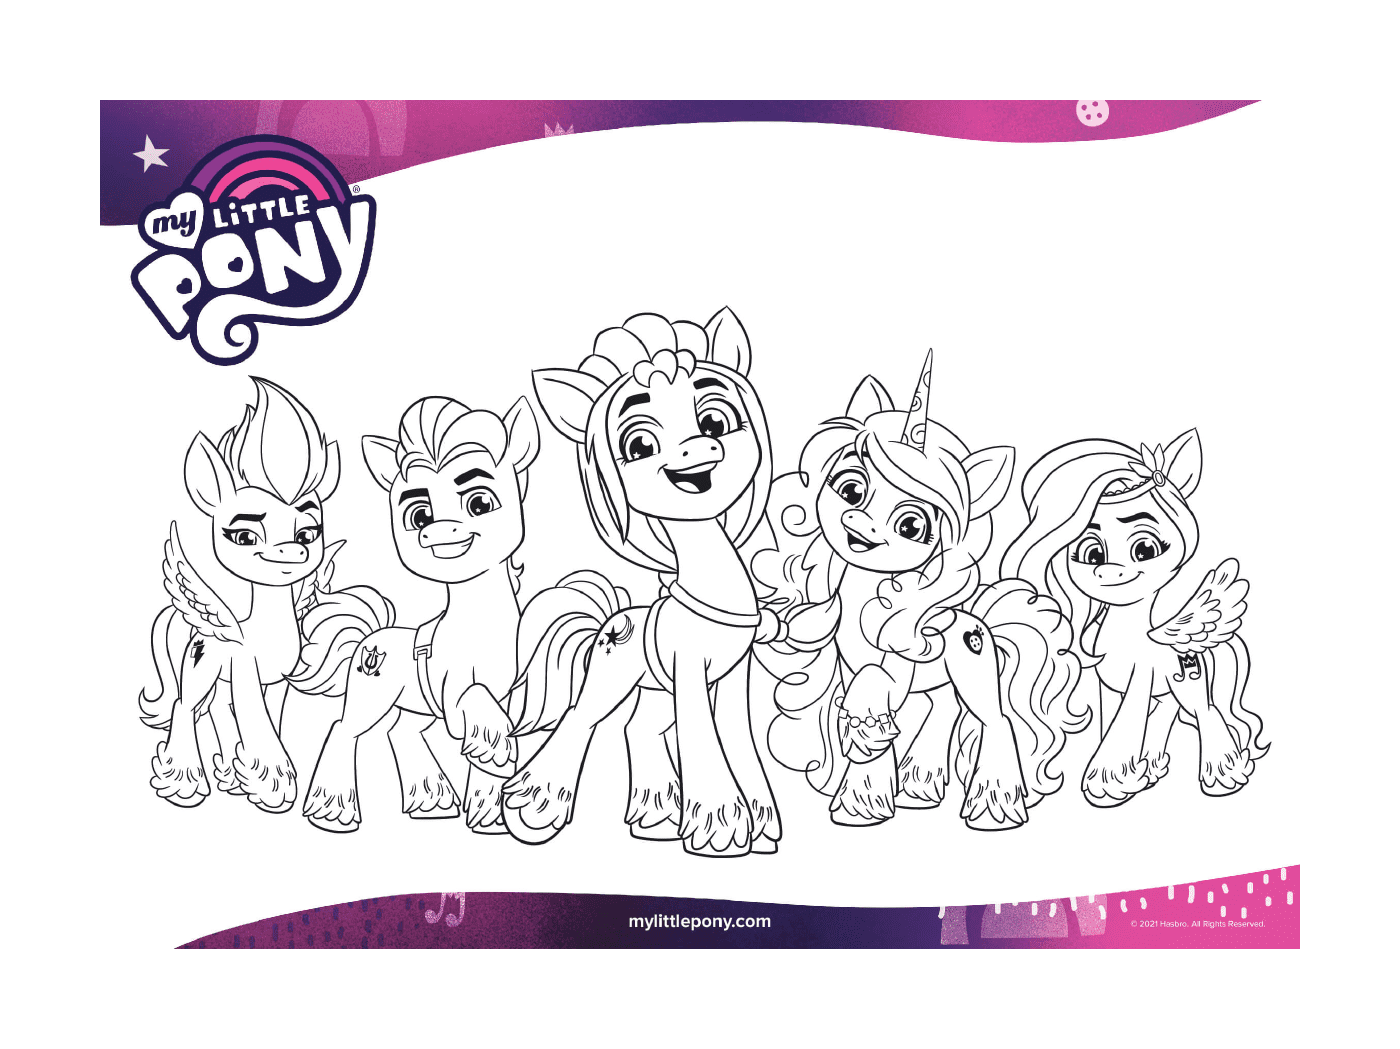  The Five Crines of My Little Pony 